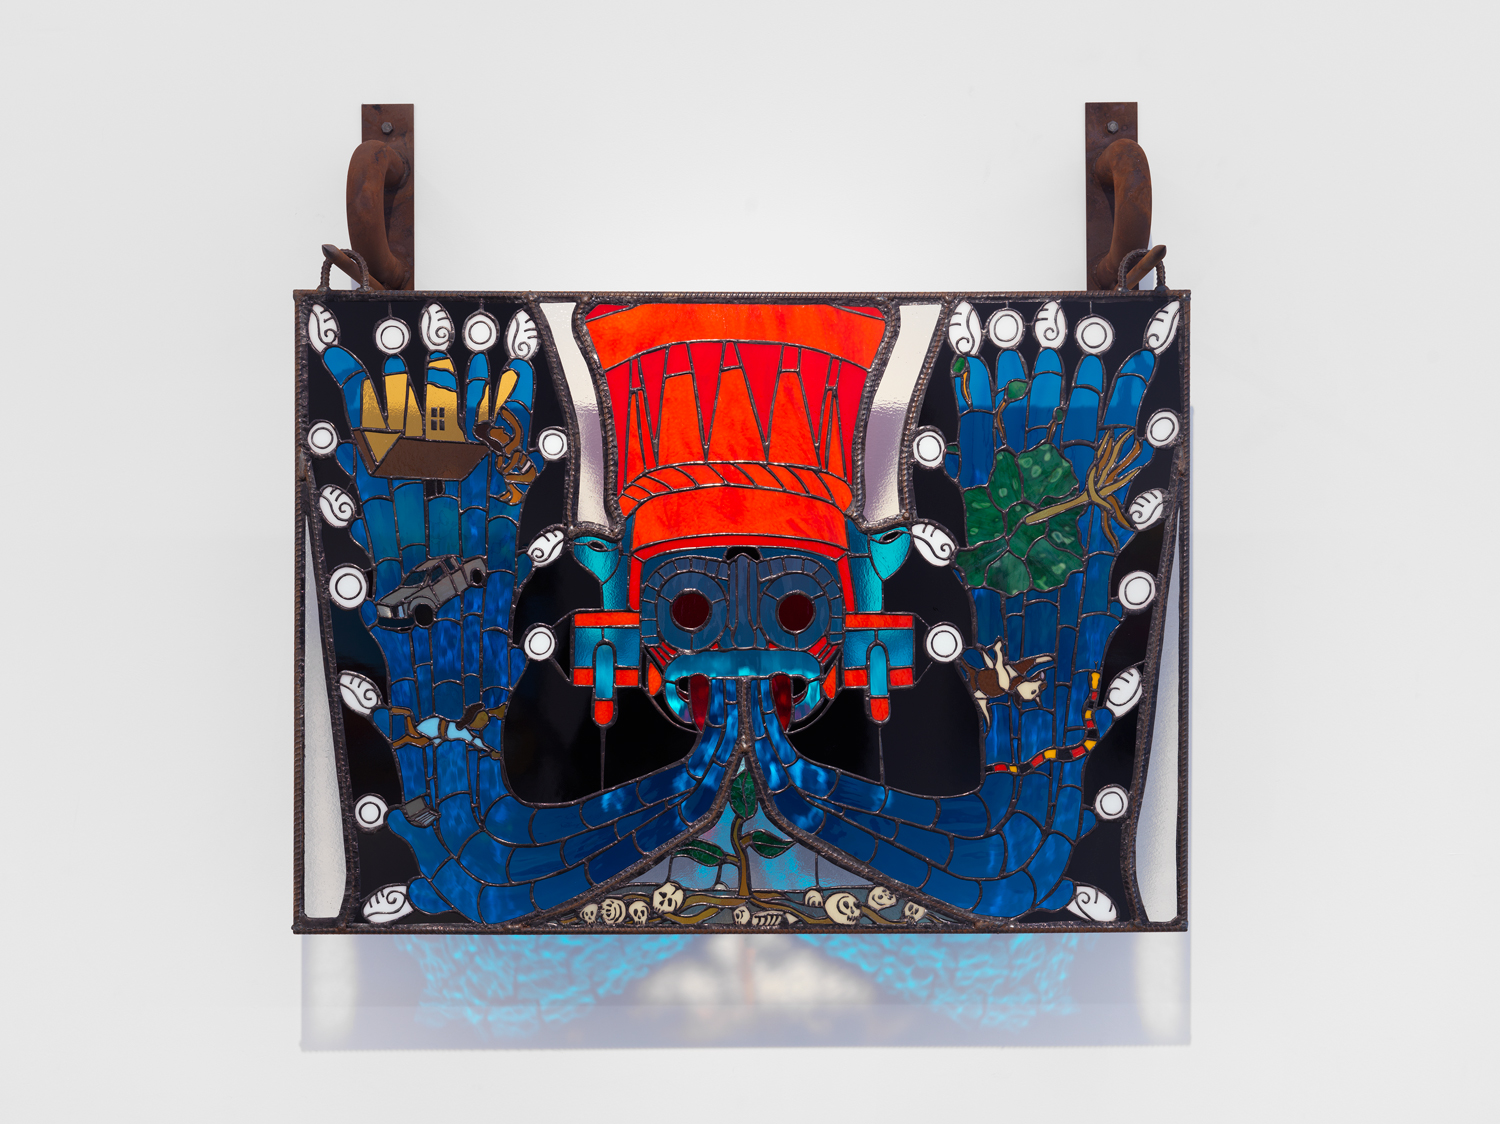 timo fahler, Tlaloc, Chalchiuhtlicue and the great flood, 2022. rebar steel, steel, stained glass, lead, aluminum. 38 ½ x 39 x 12 inches. Courtesy of Sebastian Gladstone. © timo fahler. Photo by Sebastian Gladstone Gallery